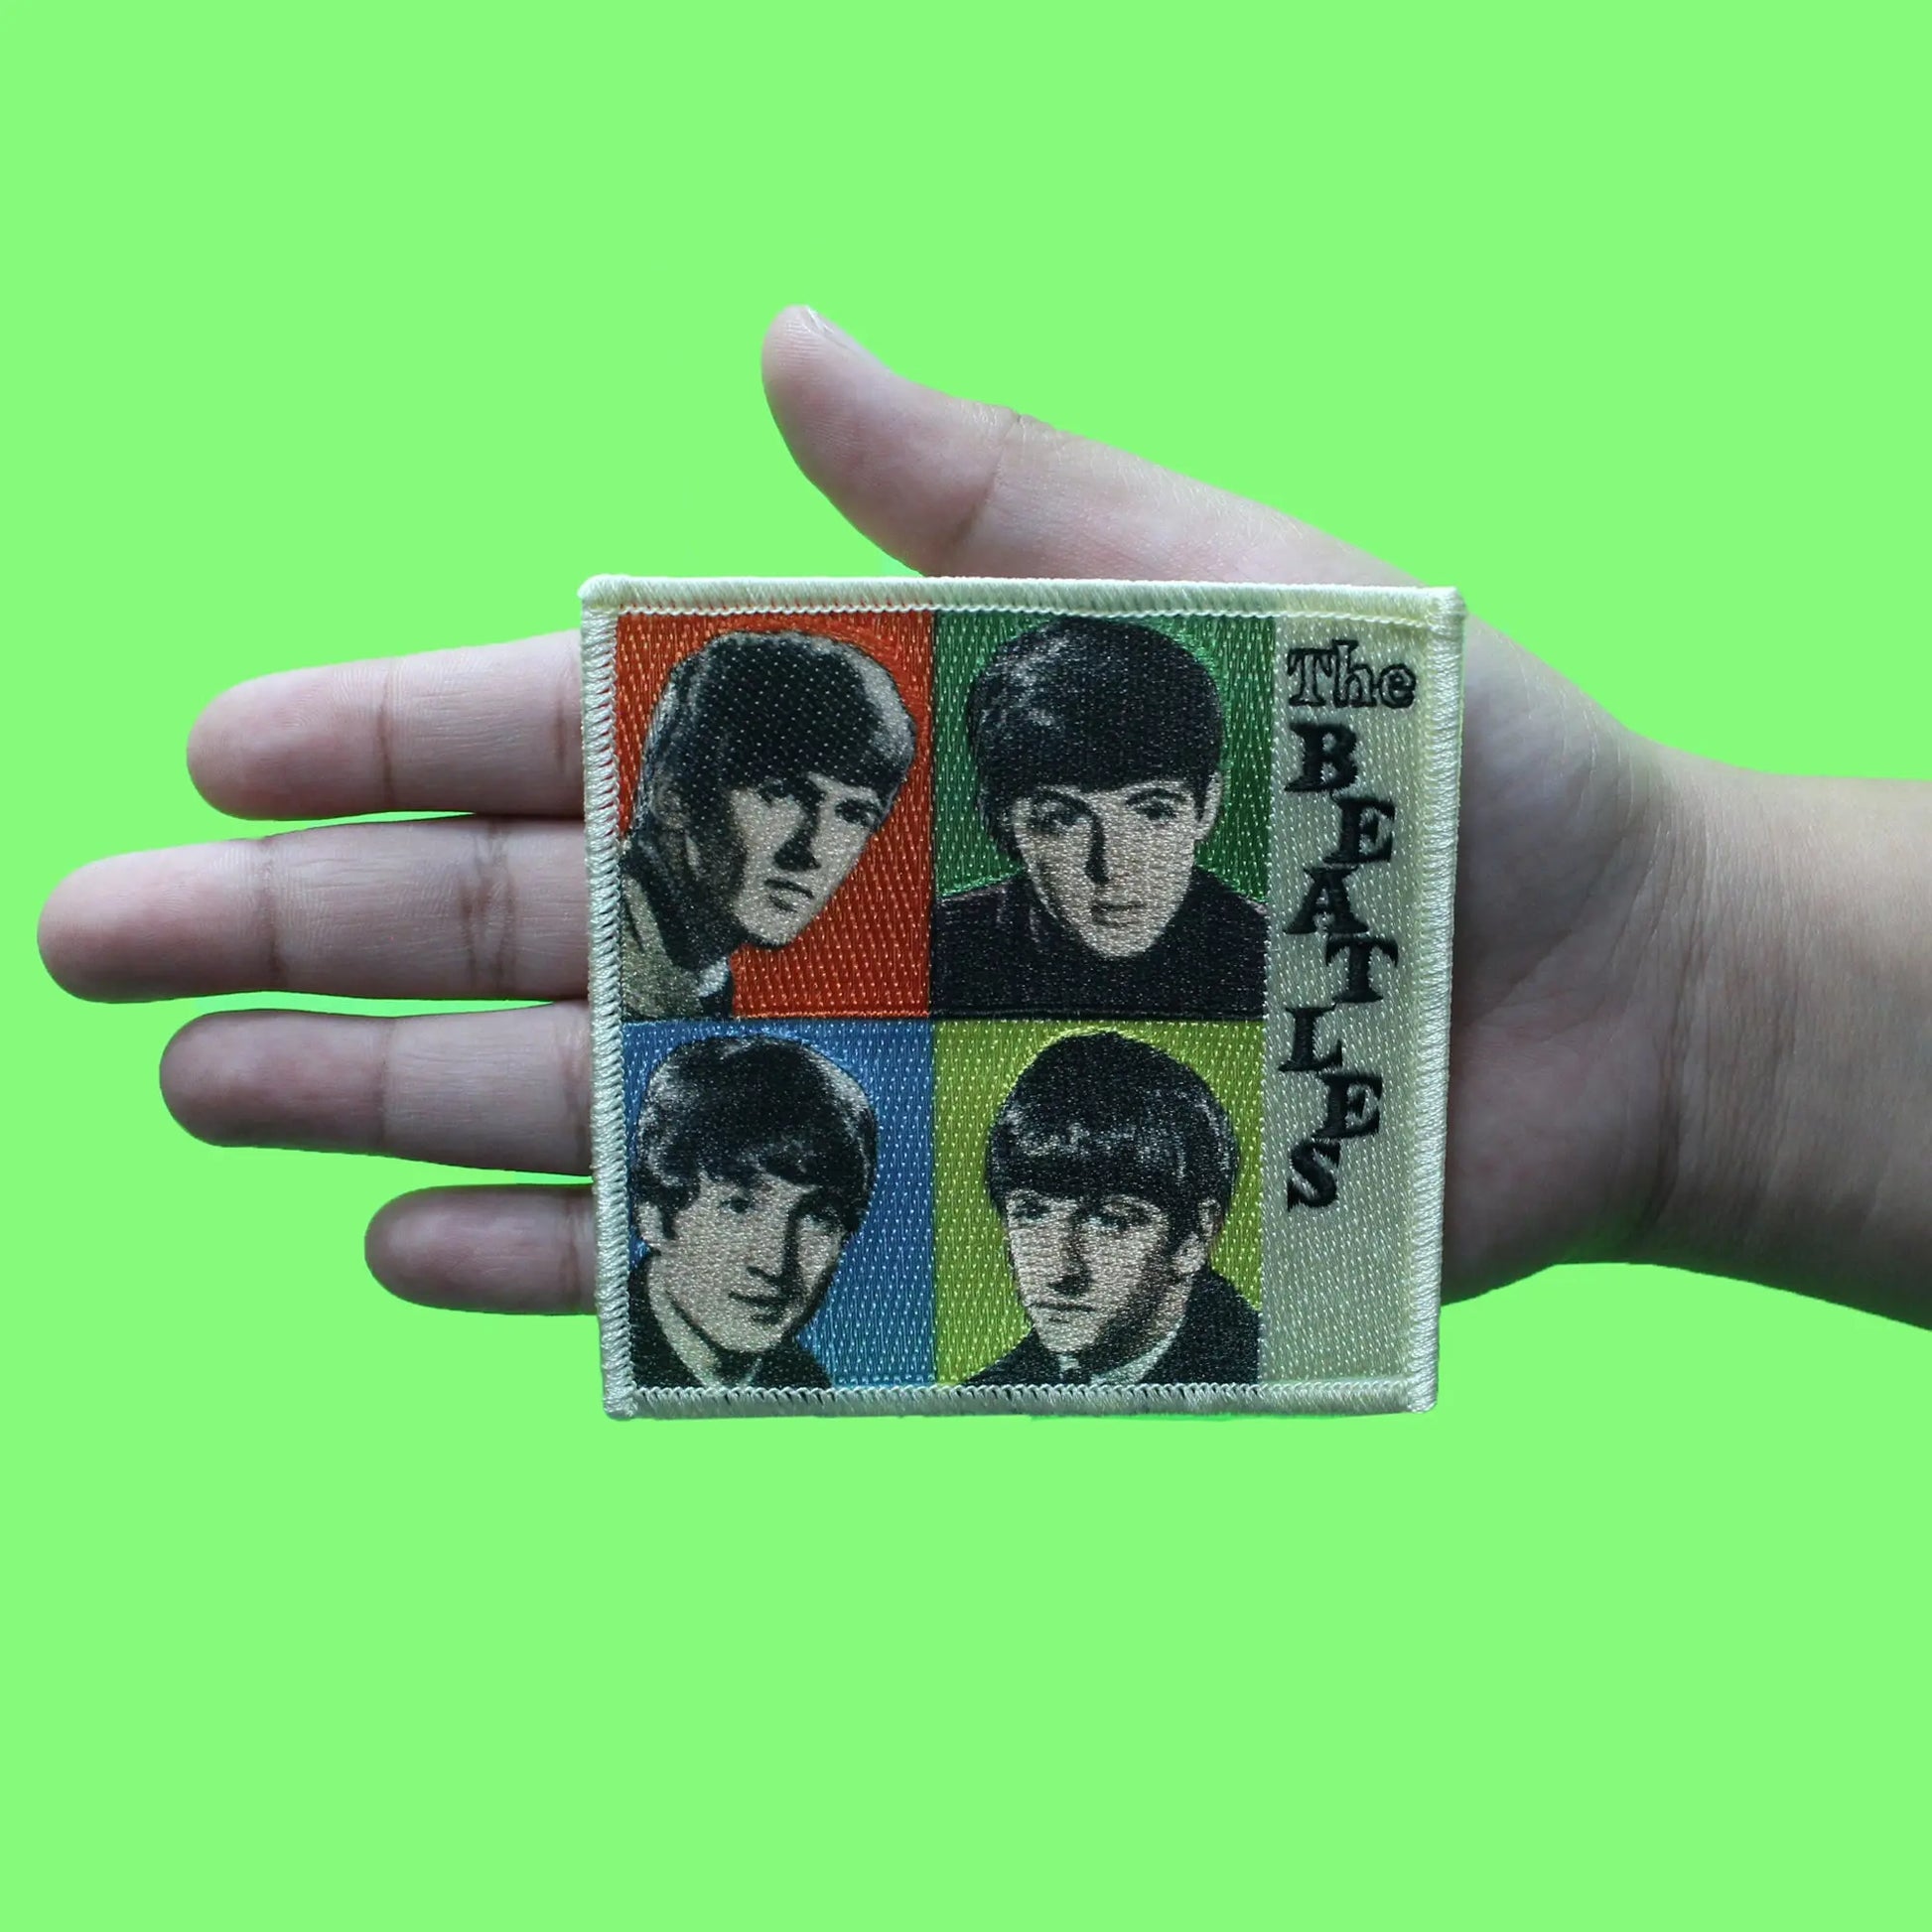 The Beatles Vintage Portraits Patch Iconic Rock Band Sublimated Iron On